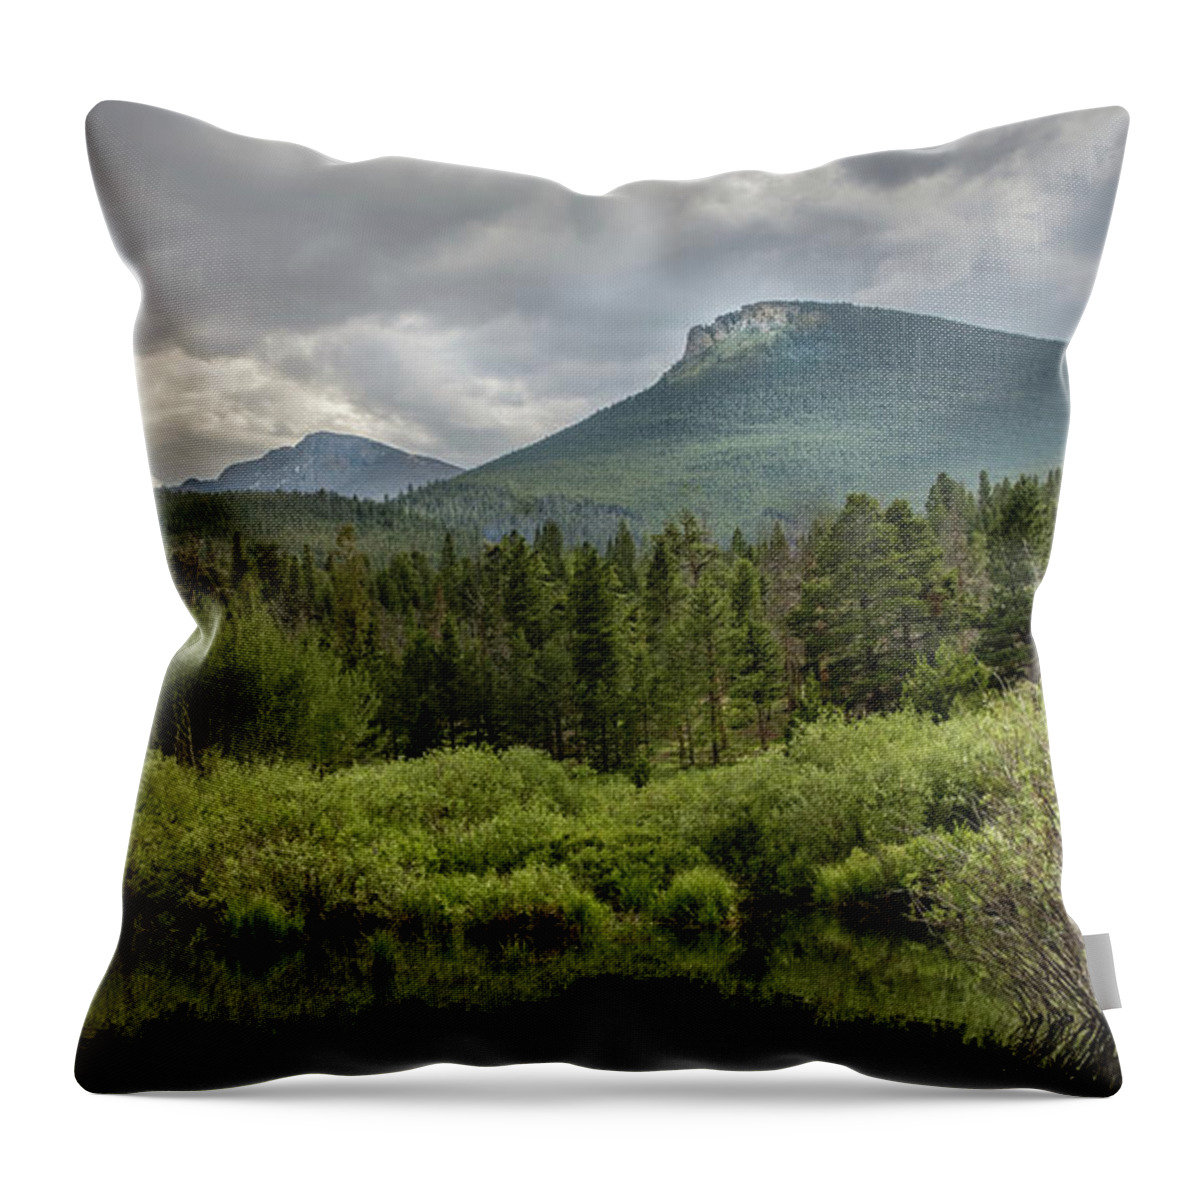  Rocky Mountain National Park Throw Pillow featuring the photograph Mountain View From The Marsh by James Woody